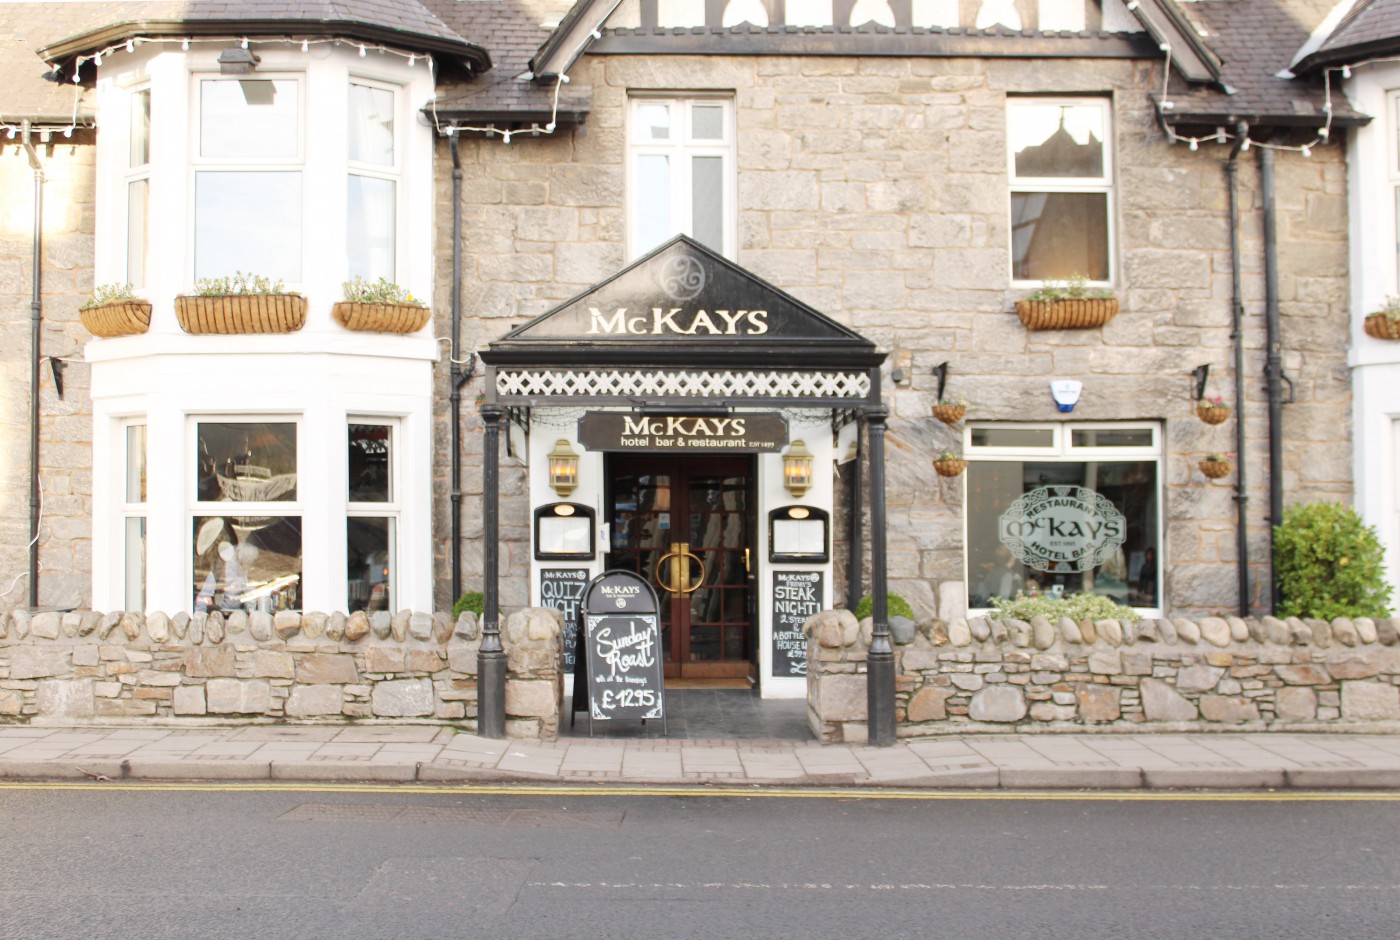 McKays restaurant and pub on the main street of Pitlochry